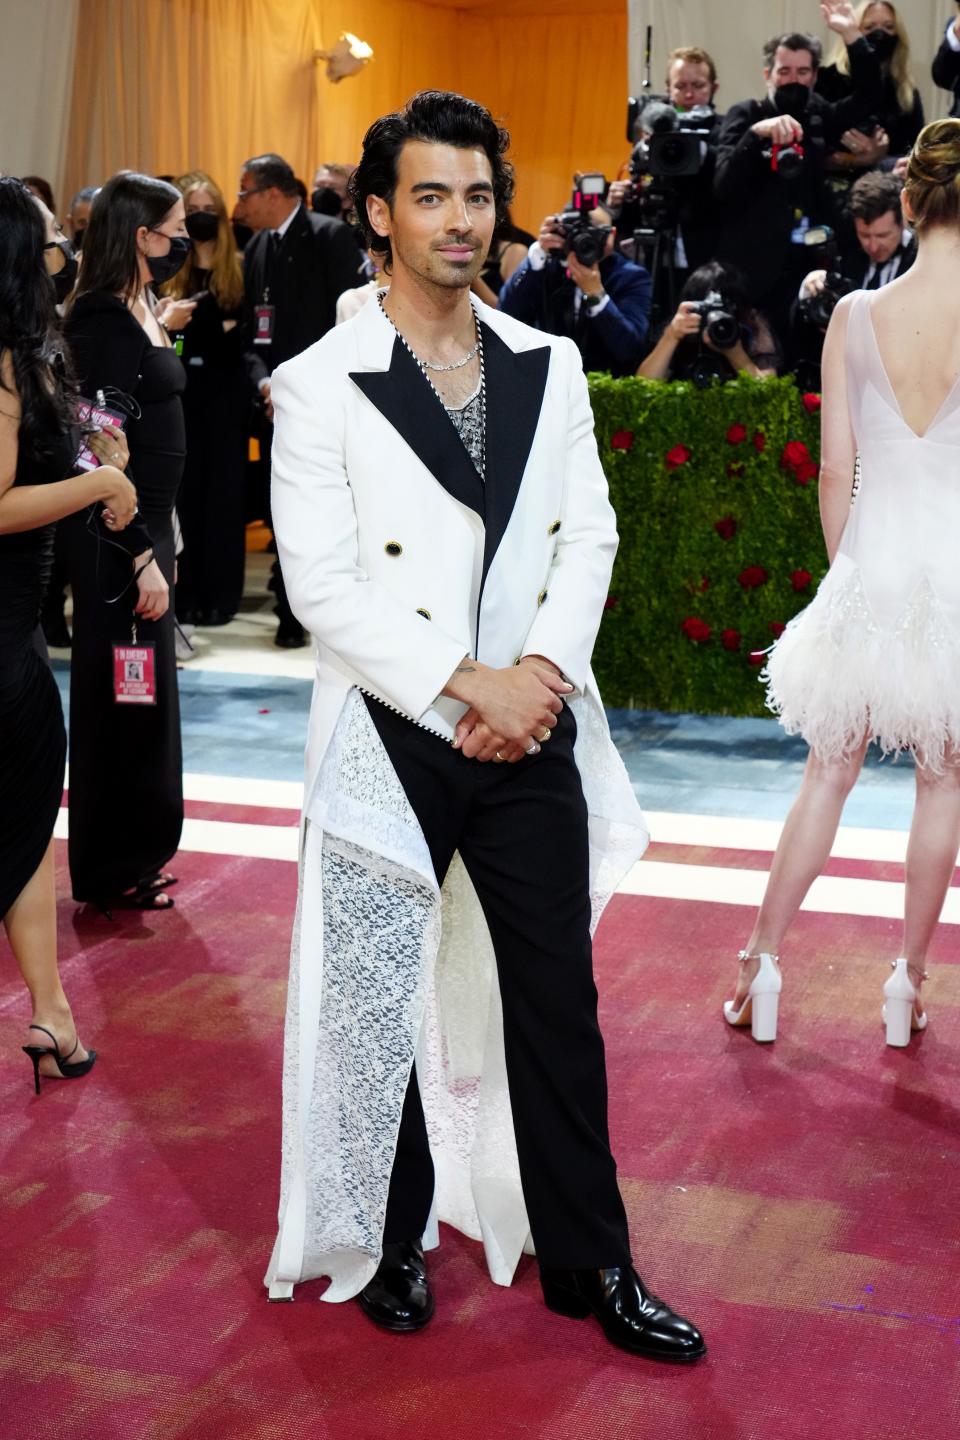 Joe in a white tuxedo jacket with black lapels and buttons and a white lace train cascading from the jacket. He's wearing a matching tank top underneath and black pants.